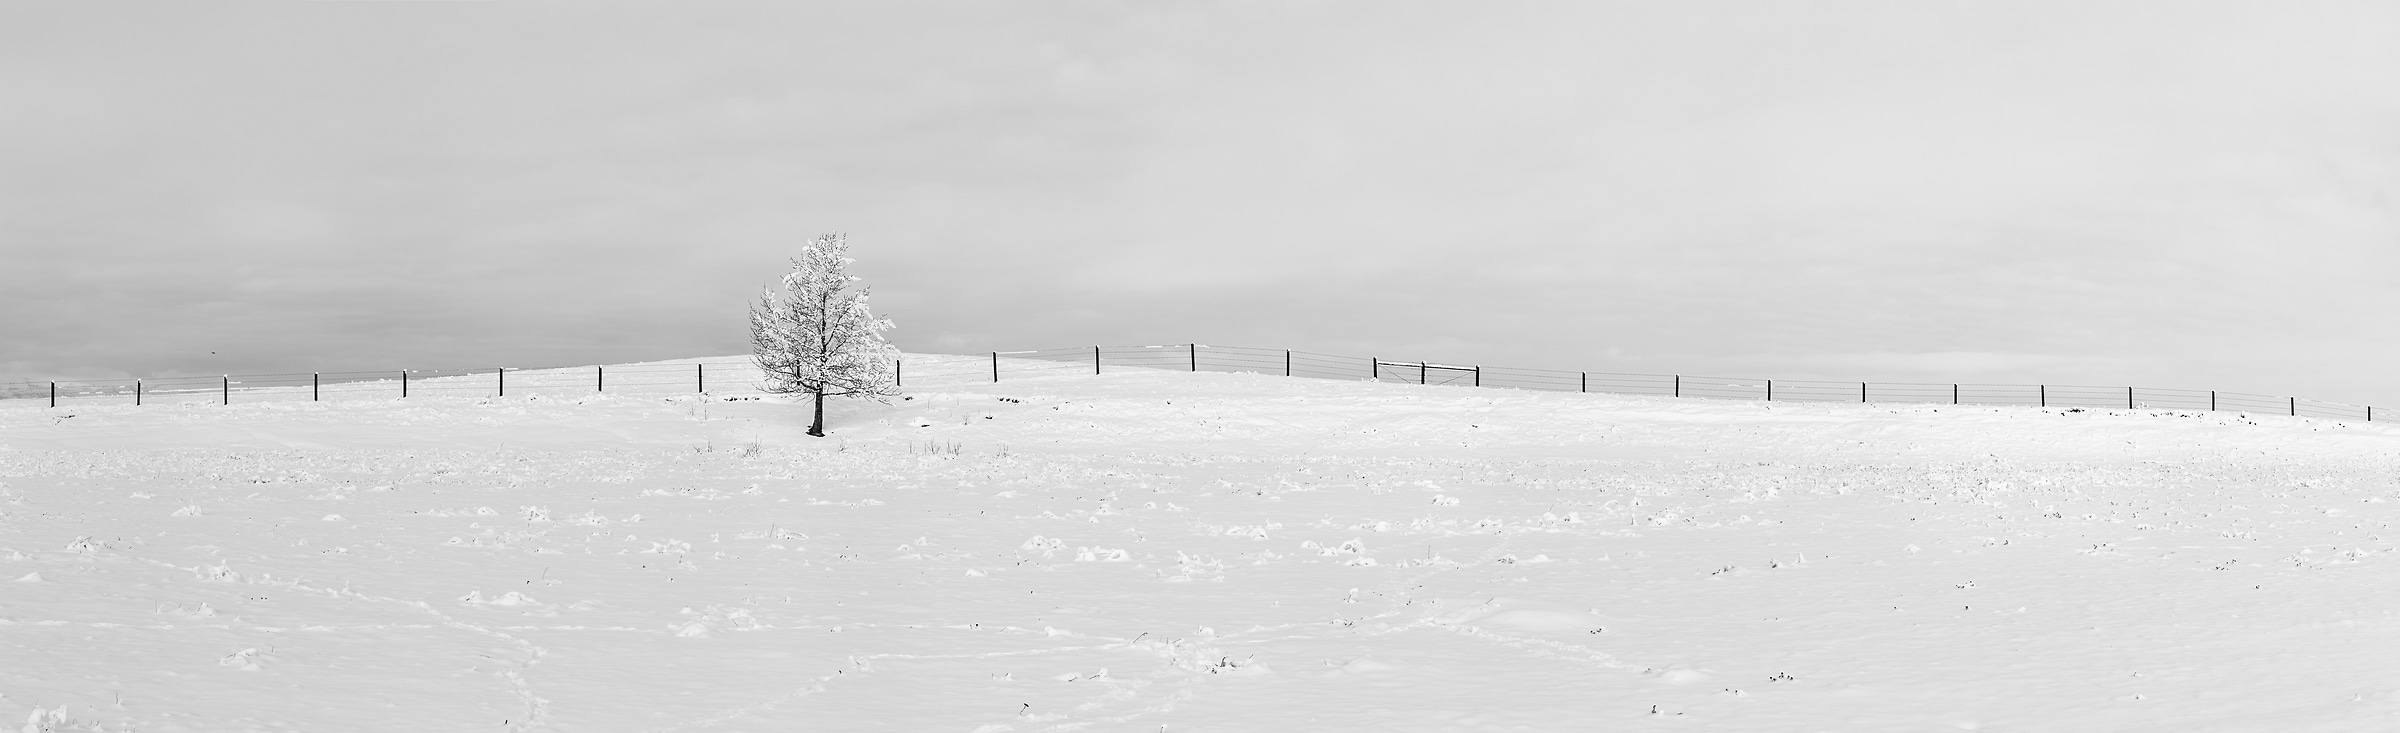 564 megapixels! A very high resolution, large-format, black & white VAST photo print of a snowy field with a tree; landscape photograph created by Scott Dimond in Cayley, Alberta, Canada.